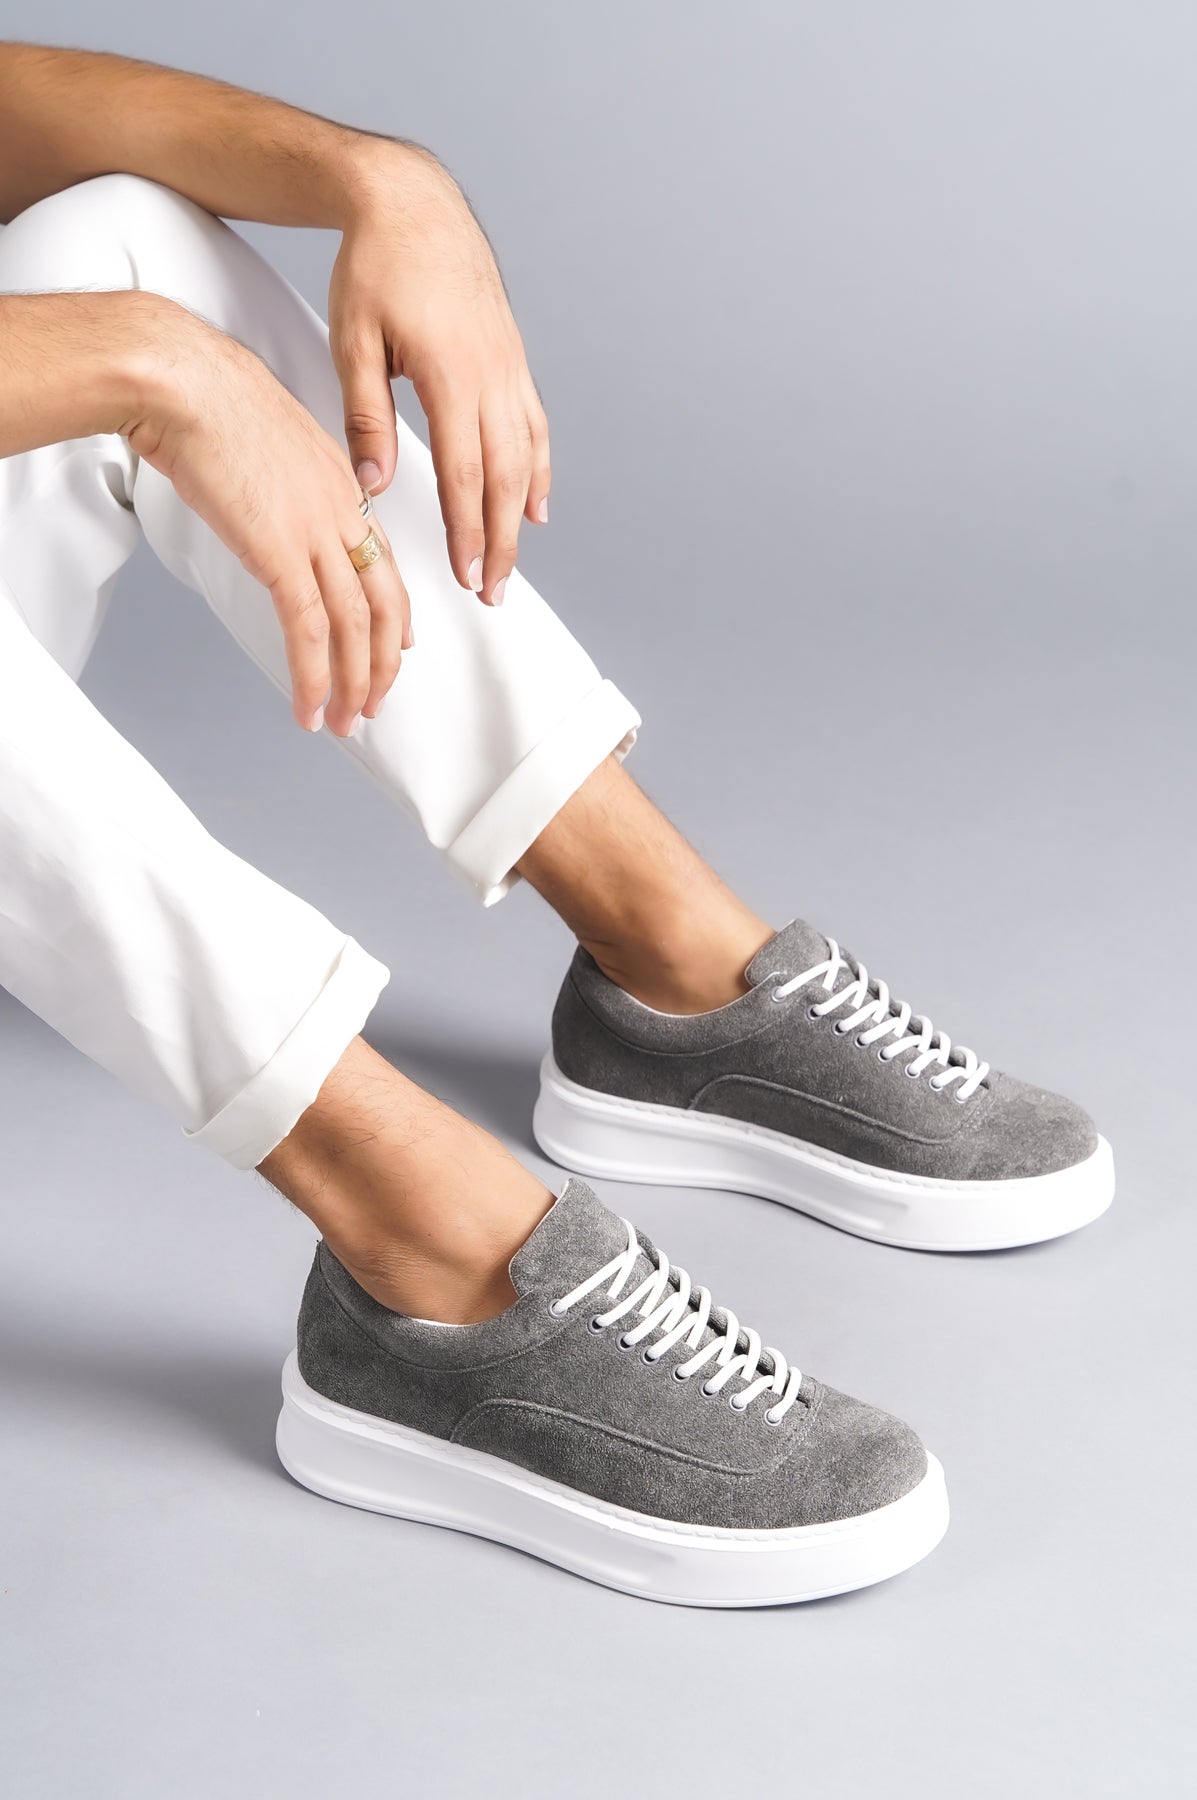 KB-005 Gray Suede Lace-up Casual Men's Sneakers Shoes - STREETMODE ™